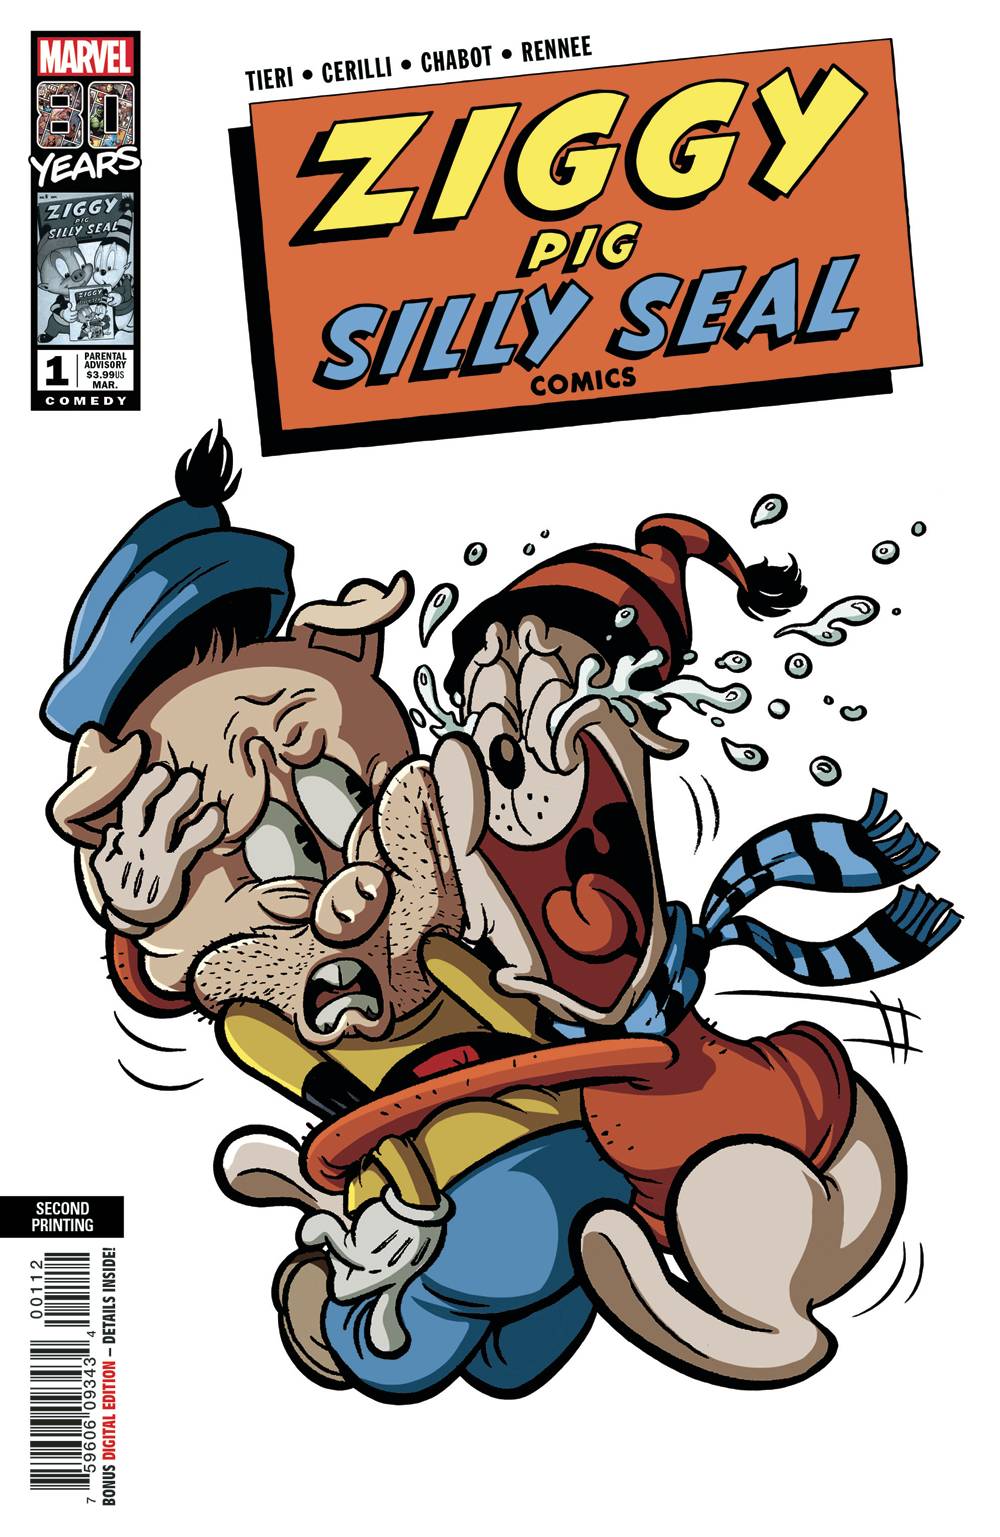 04/10/2019 ZIGGY PIG SILLY SEAL COMICS #1 2ND PTG CHABOT VARIANT 04/10/19